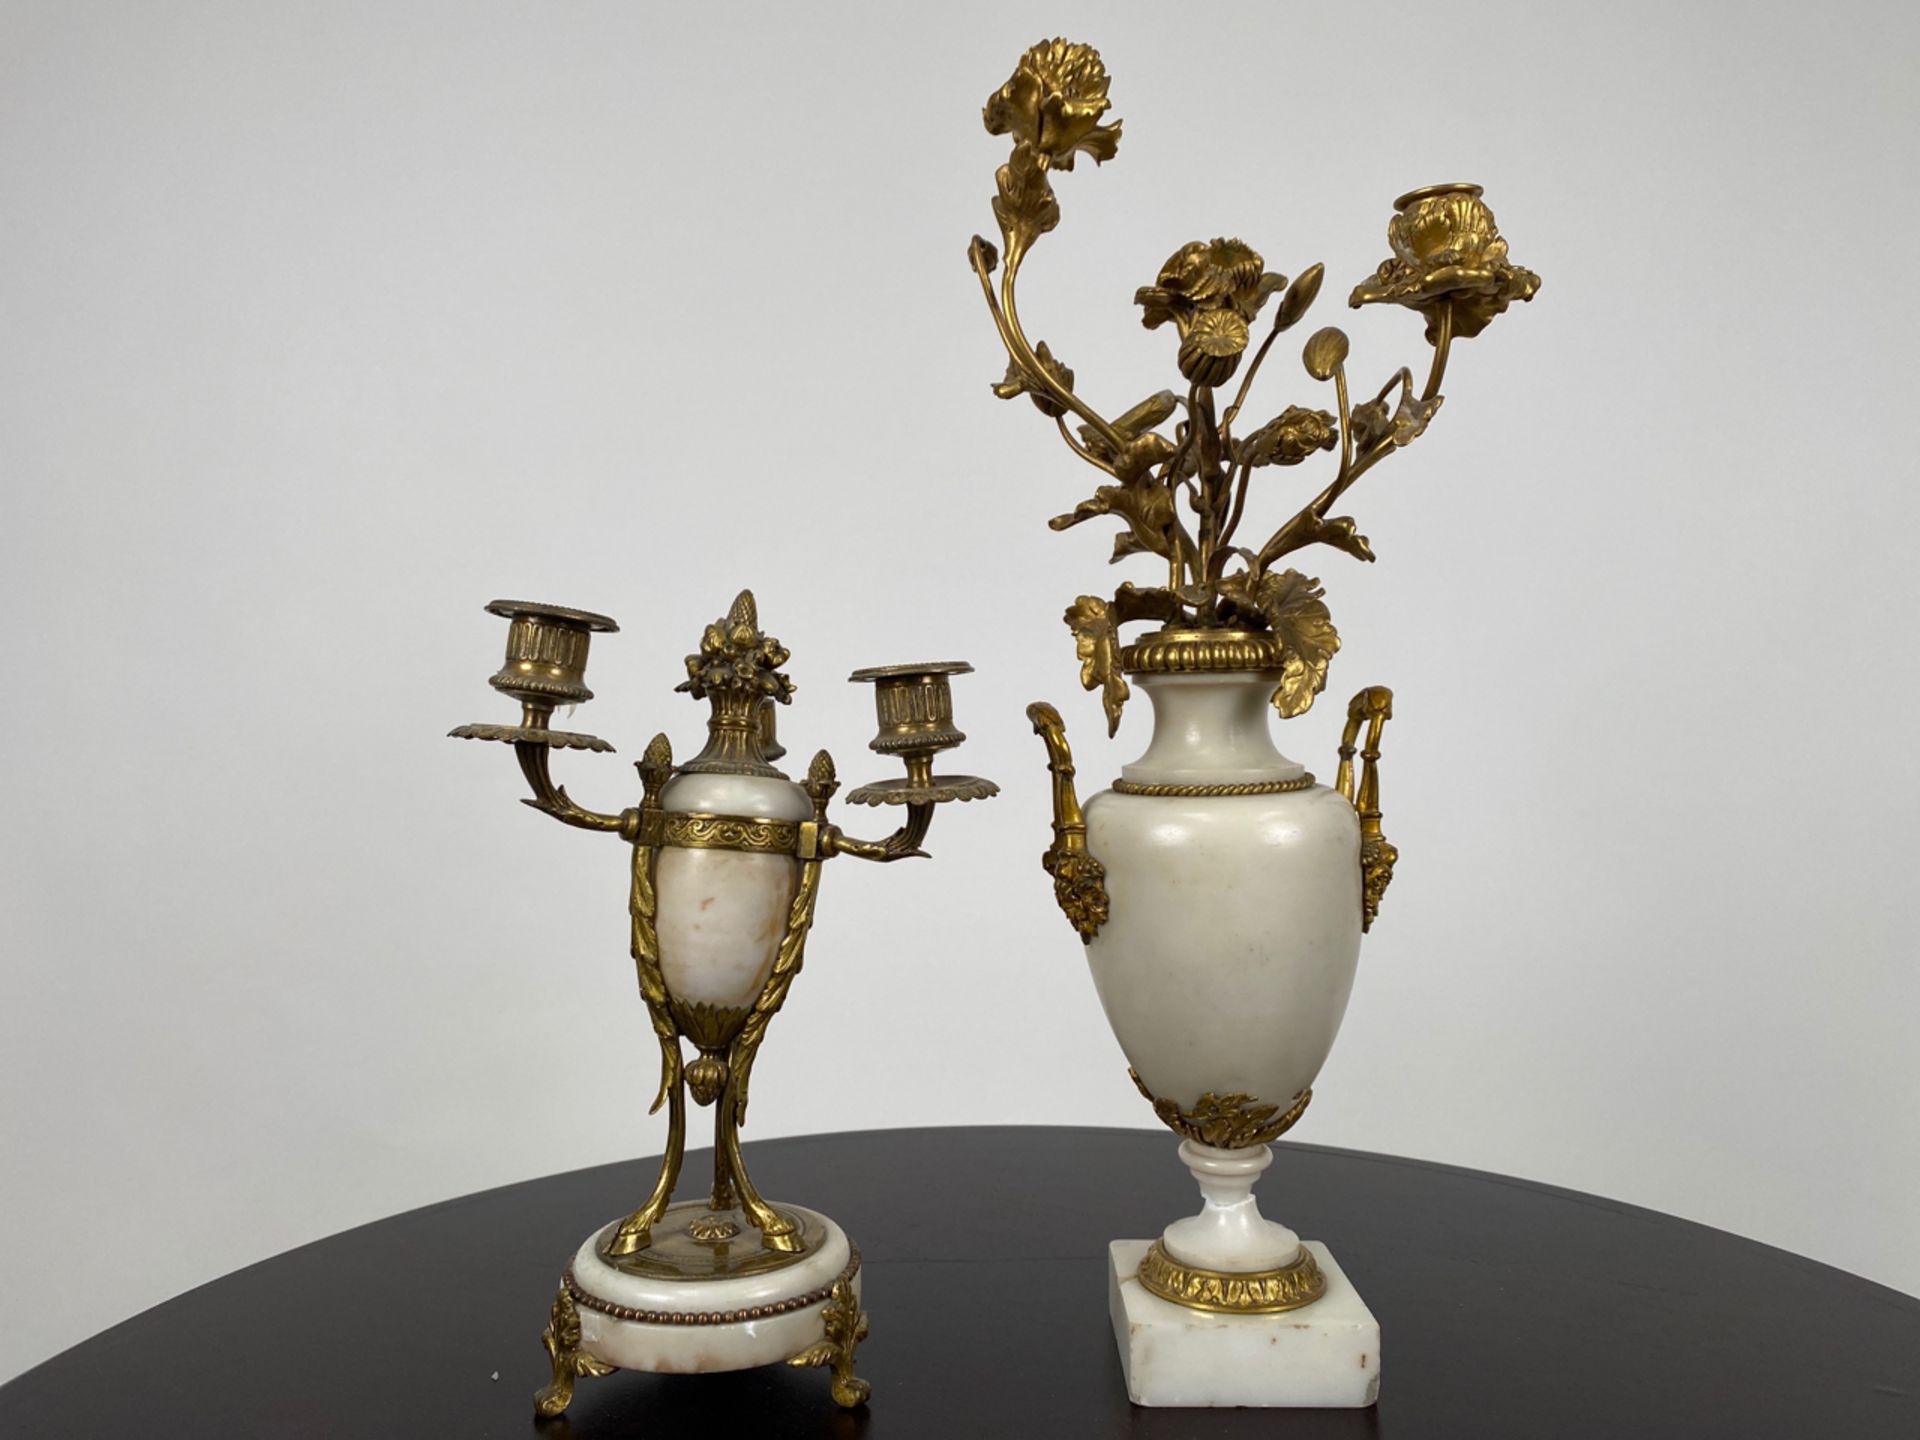 Pair of Marble and Bronze Urn Candlestick Ornaments - Image 3 of 10